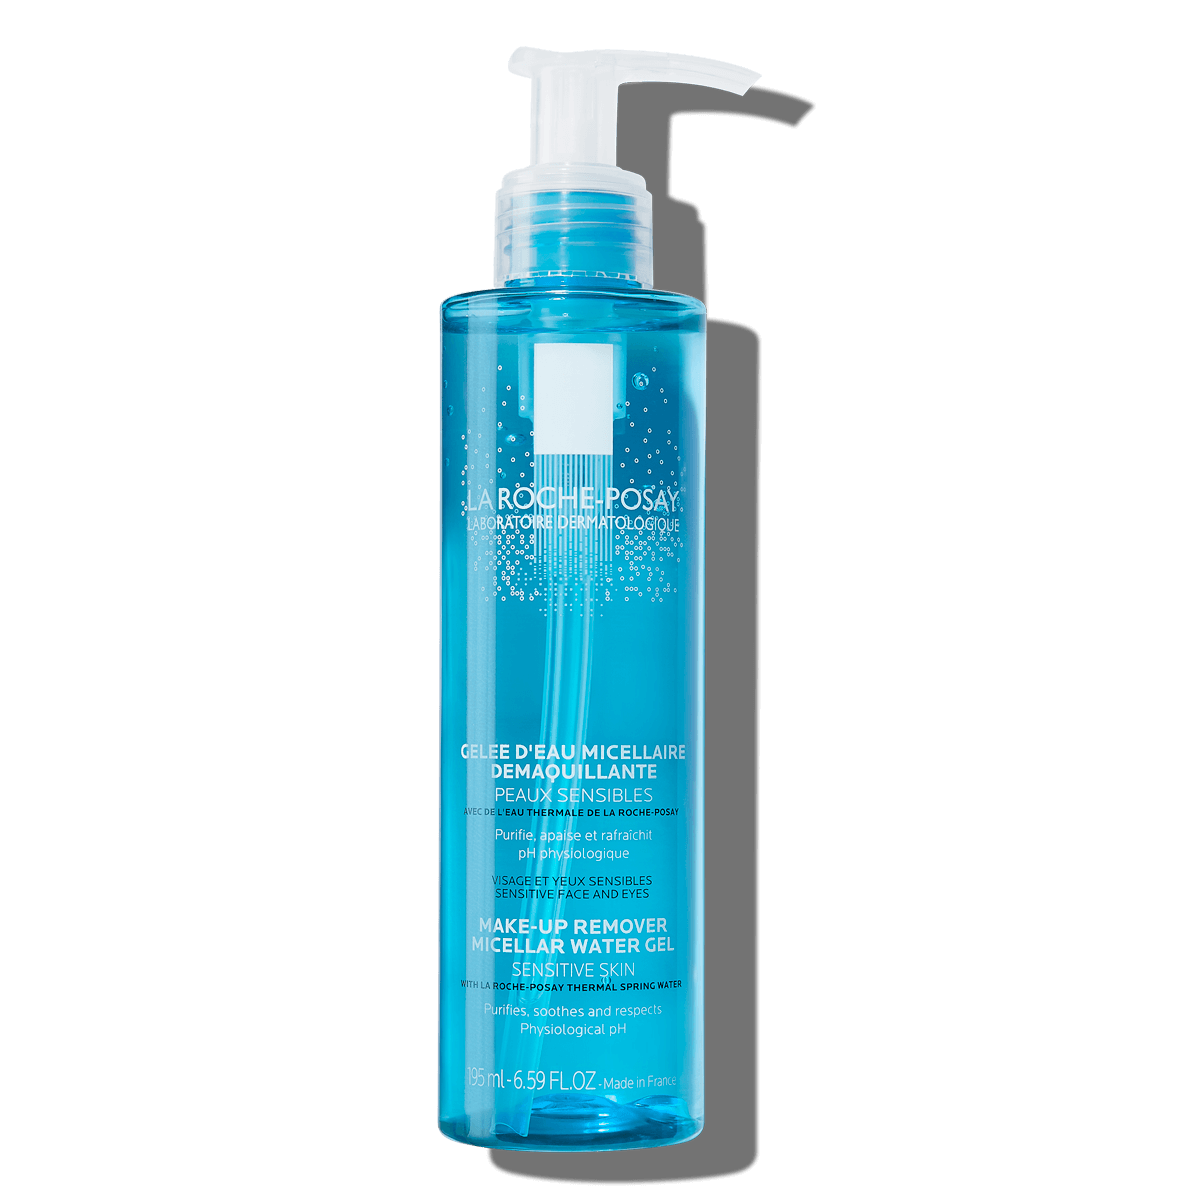 La-Roche-Posay-ProductPage-Make-Up-Remover-Micellar-Water-Gel-195ml-3337872419775-Front